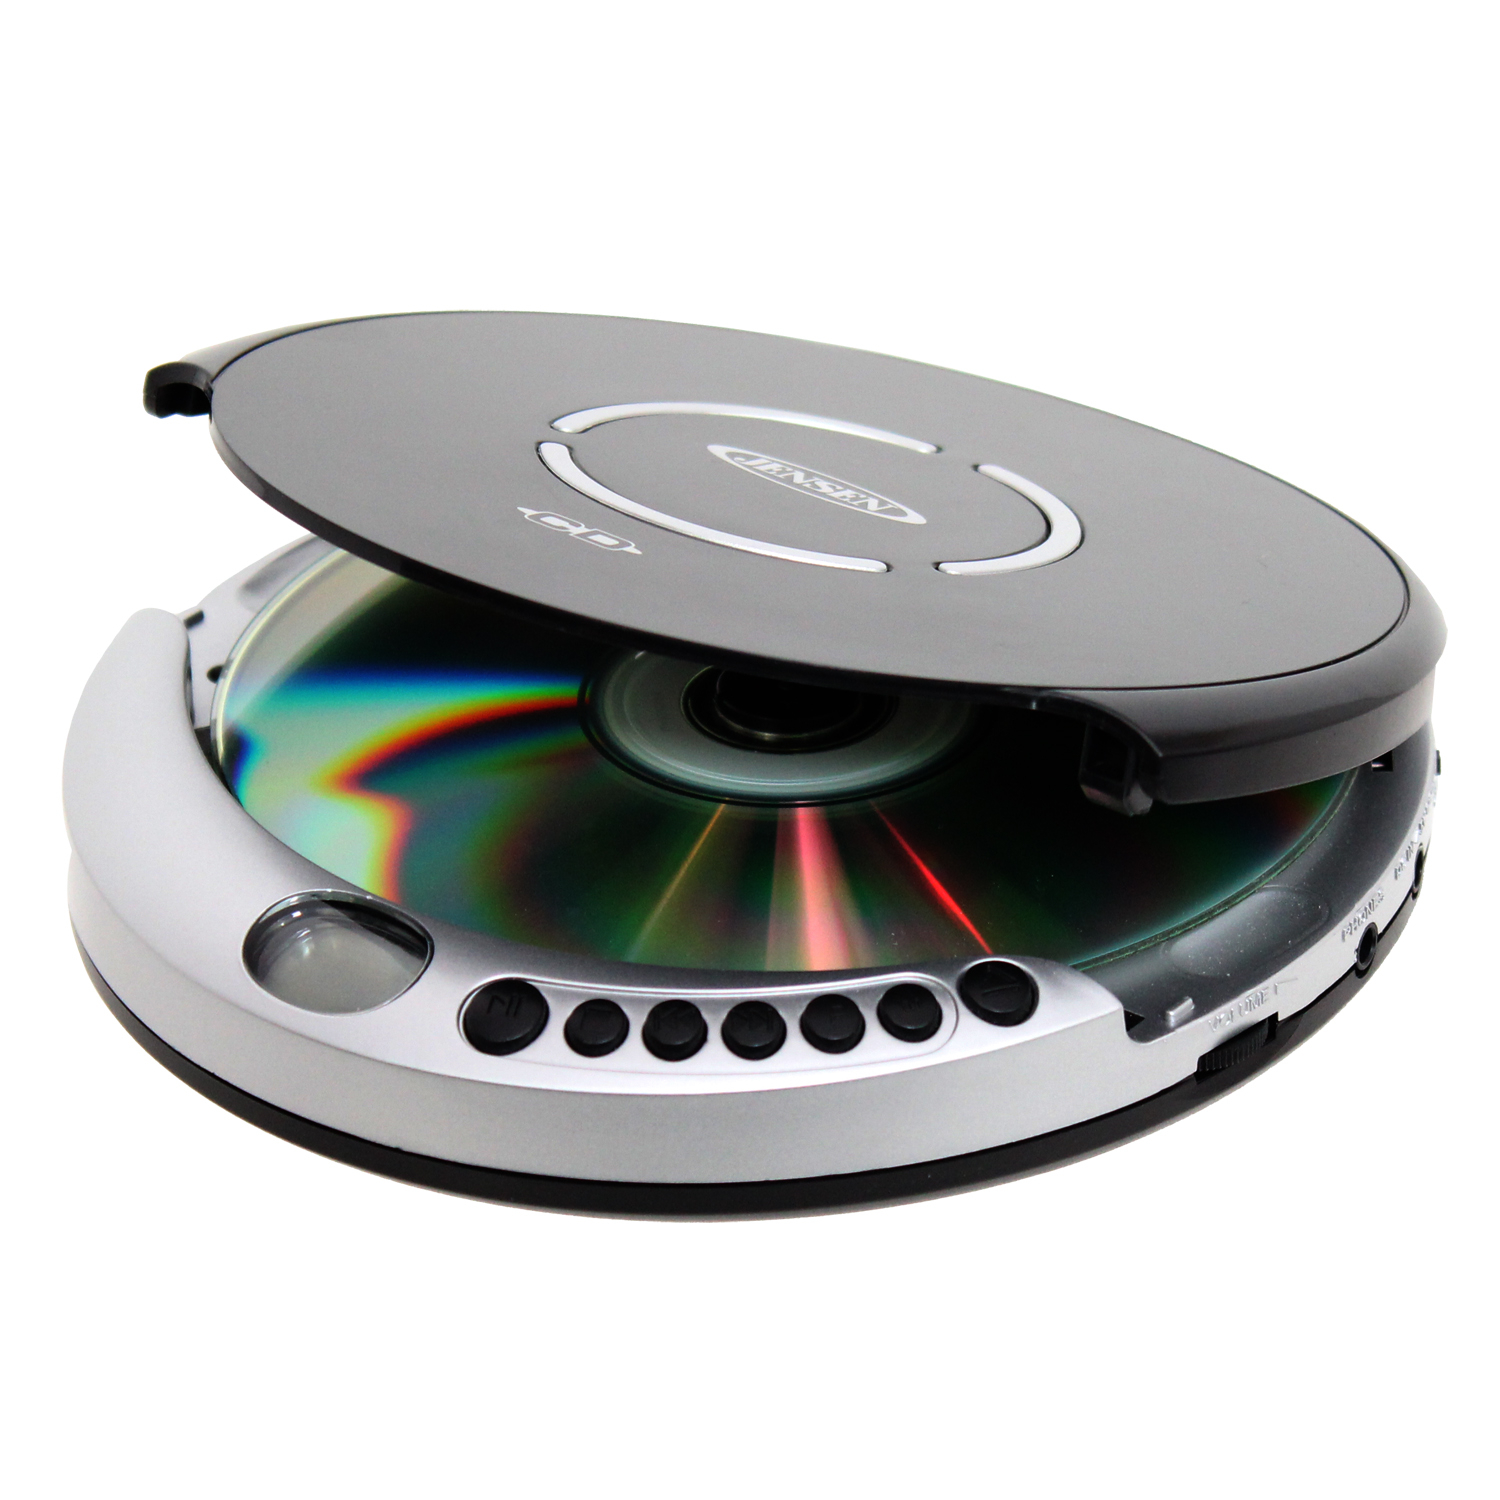 video cd players